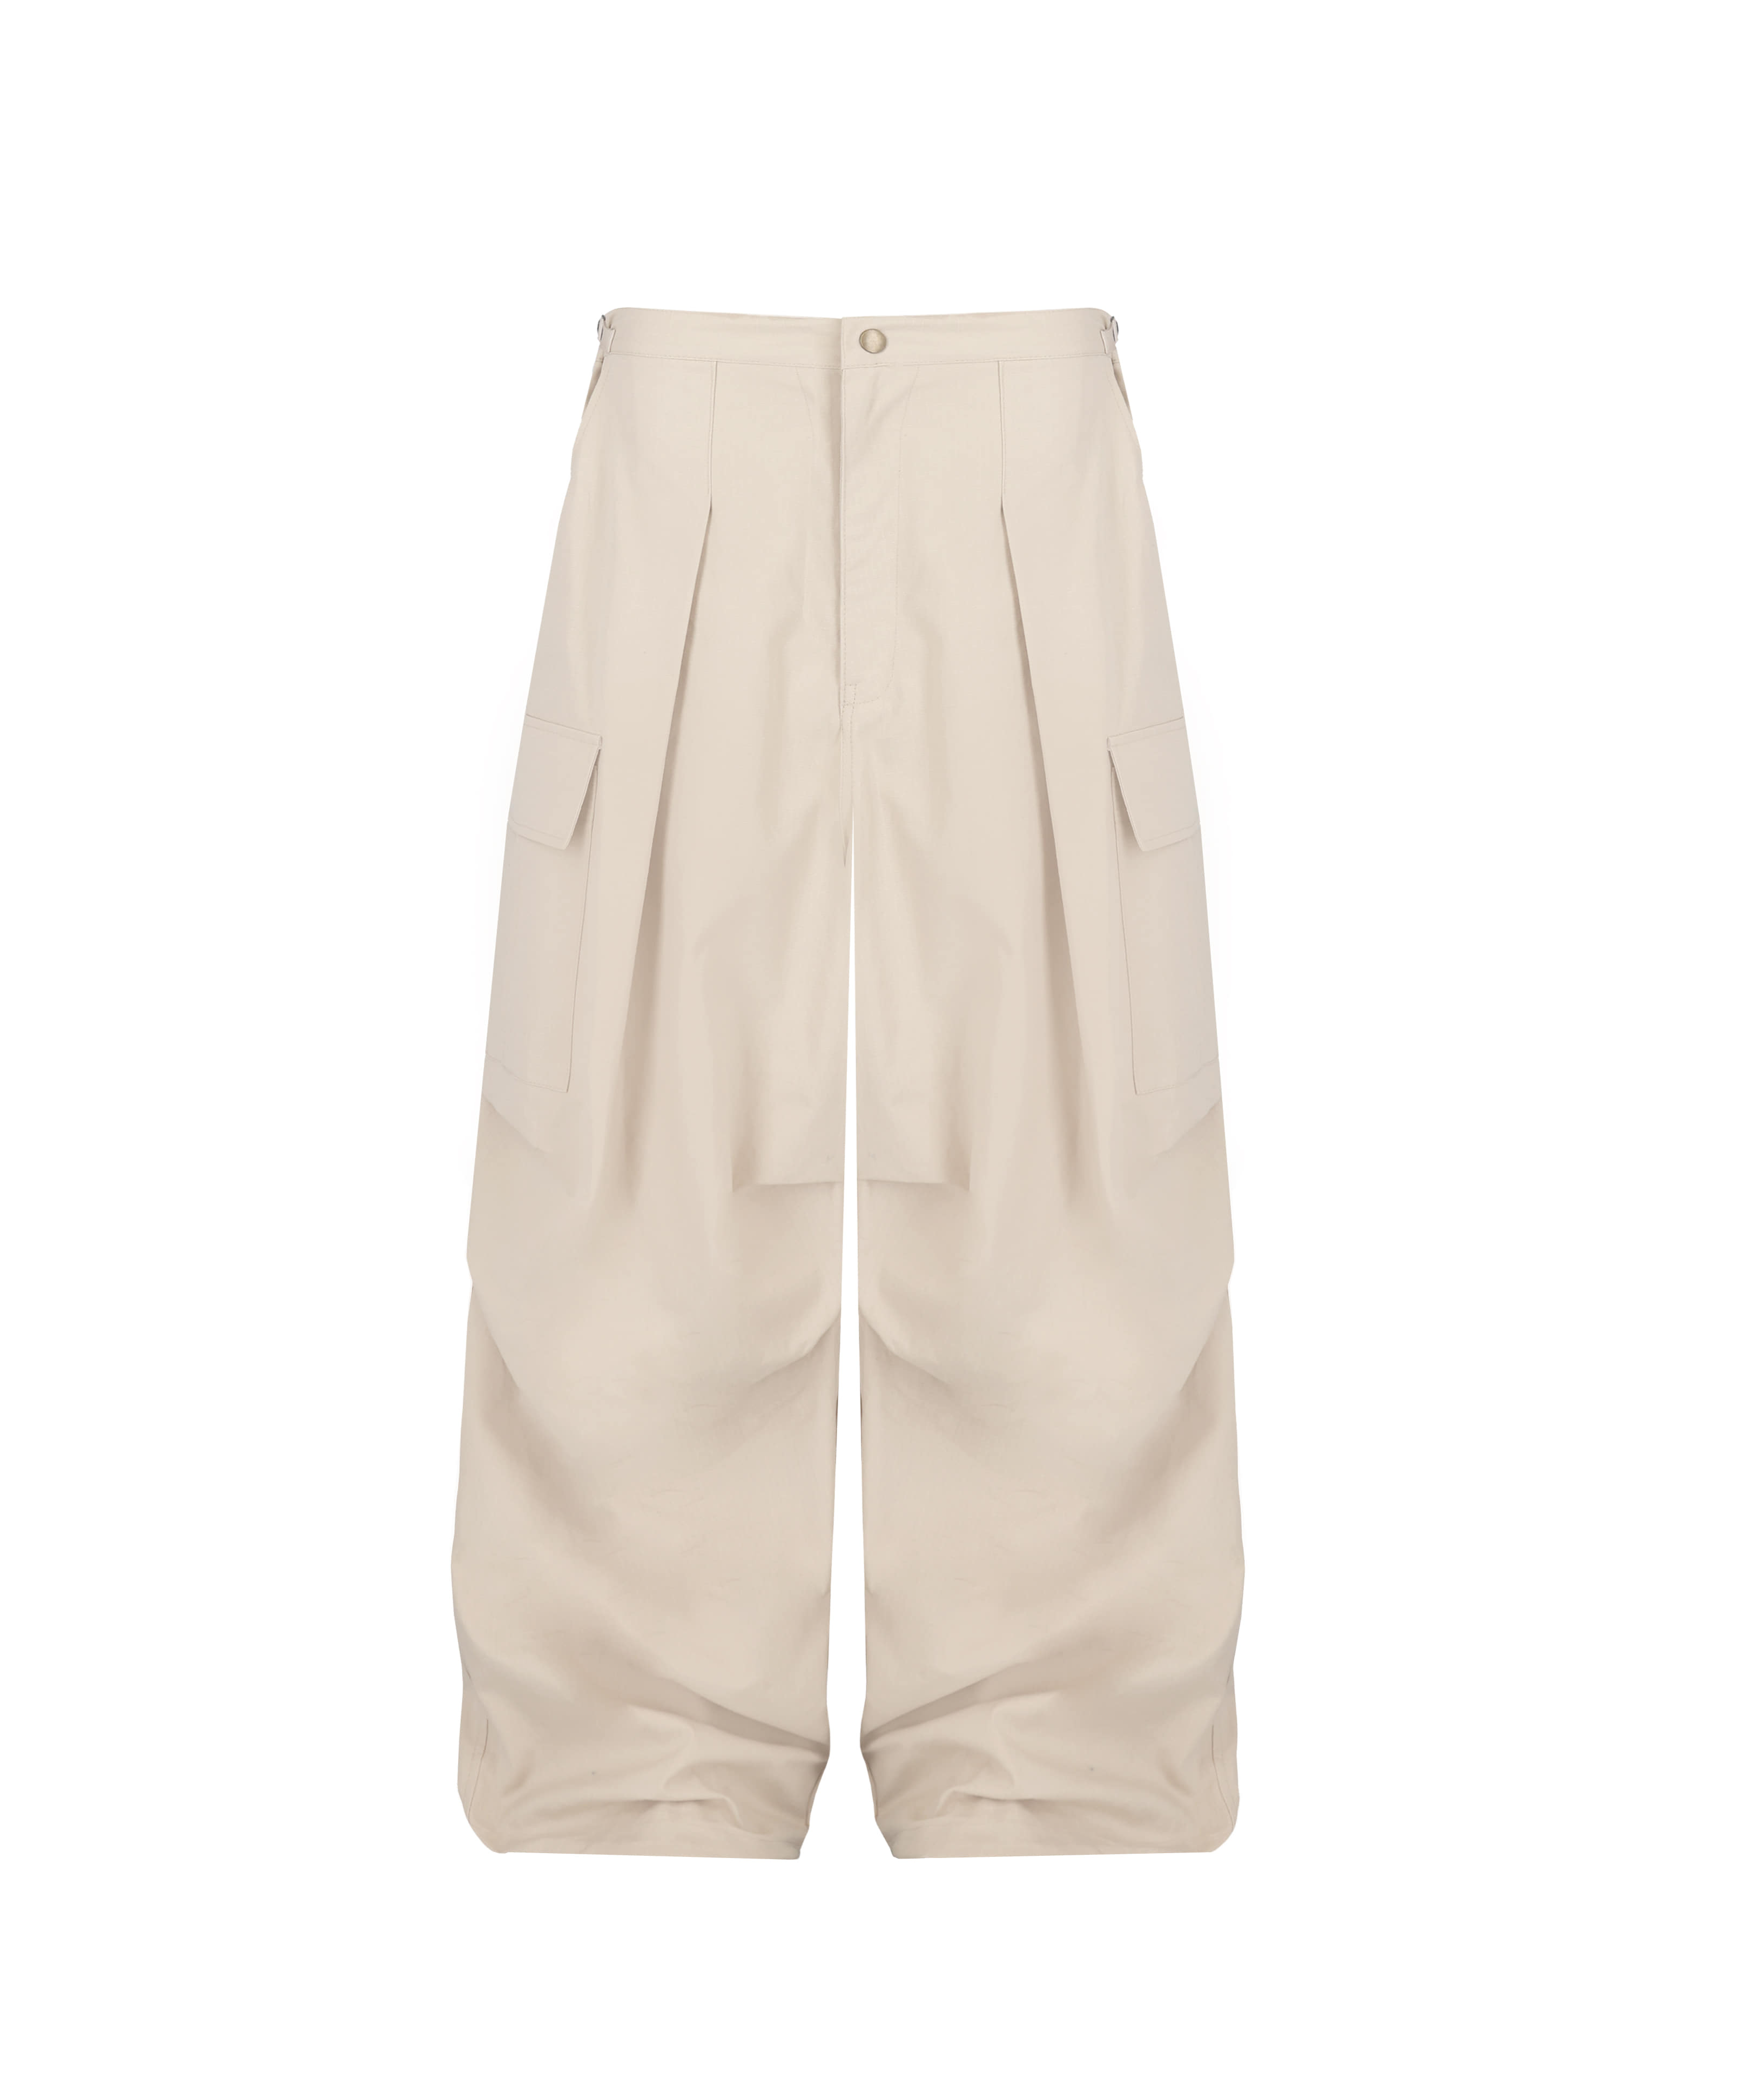 [Delivery delay] London street cargo pants